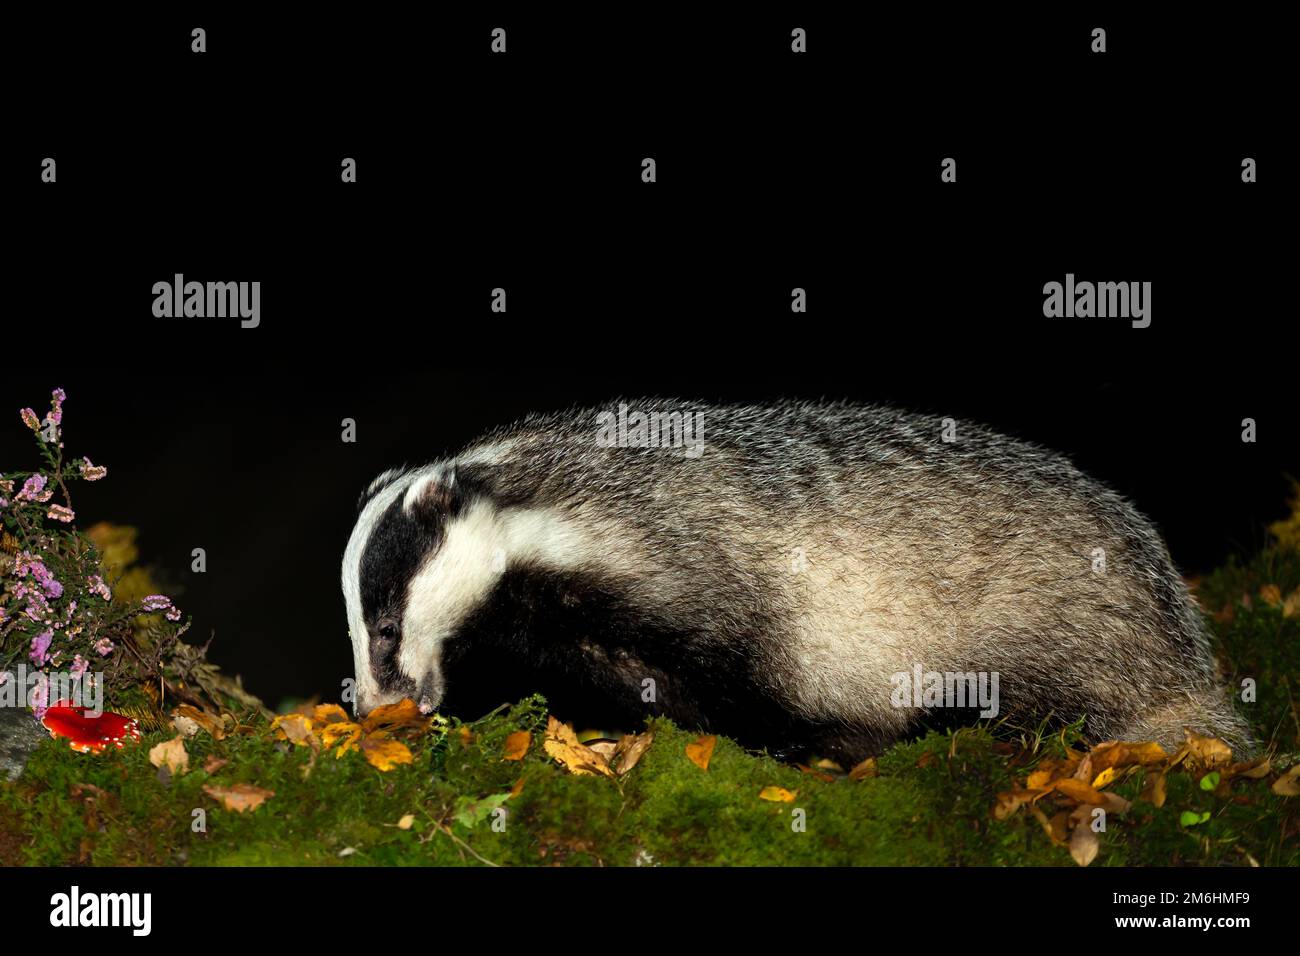 Badger, Scientific name: Meles Meles.  Clse up of a wild badger, foraging in Autumn leaves with purple heather and red fly agaric mushroom.  Facing le Stock Photo